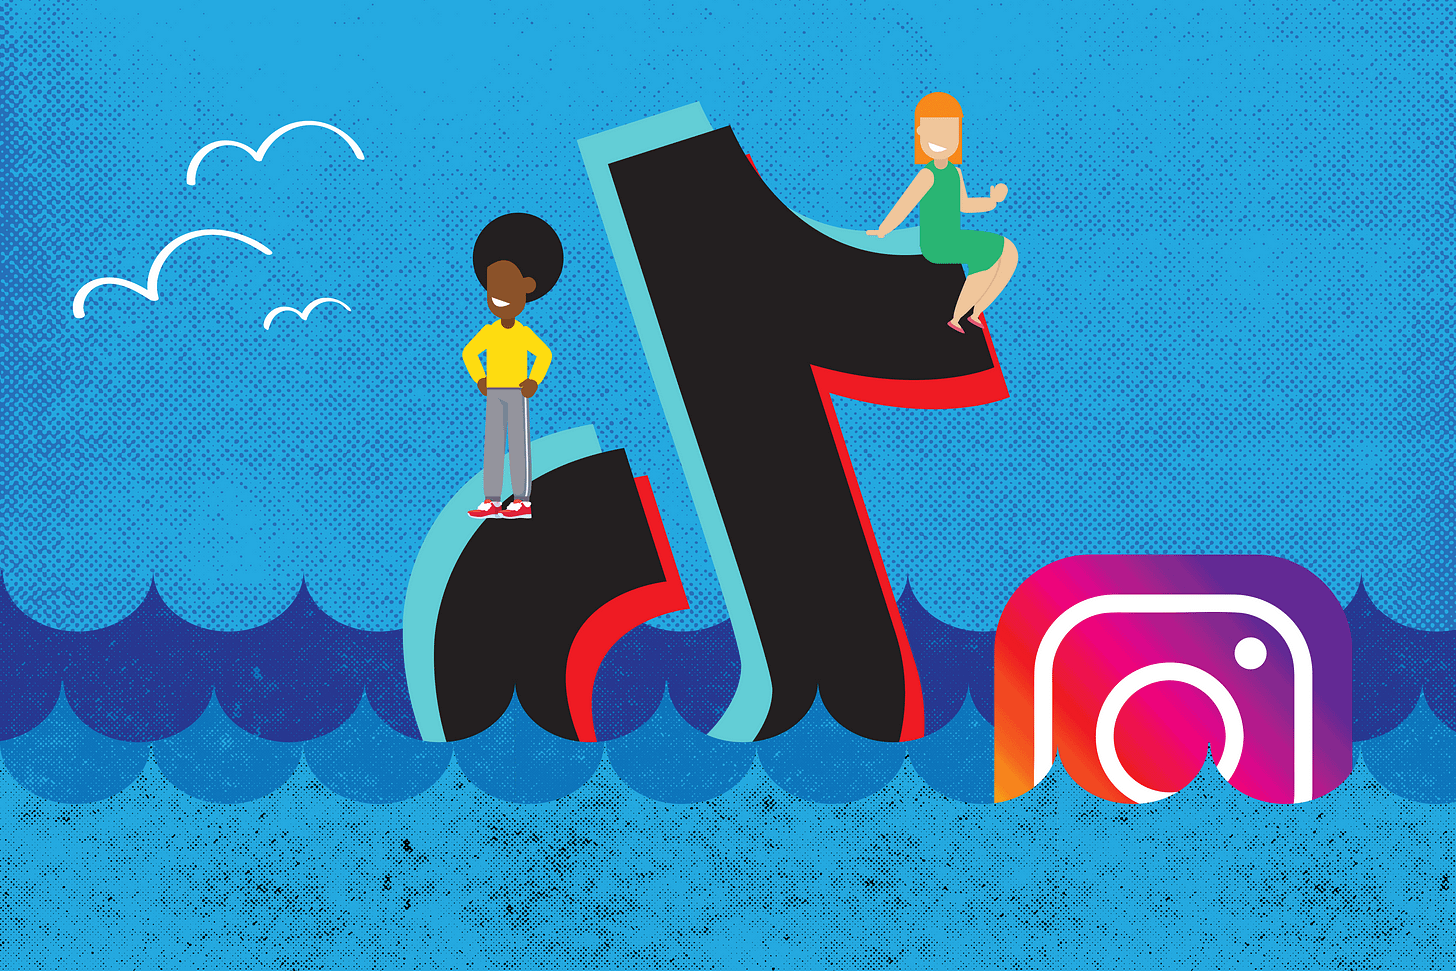 Amid fears of TikTok's demise, influencers are fleeing the app